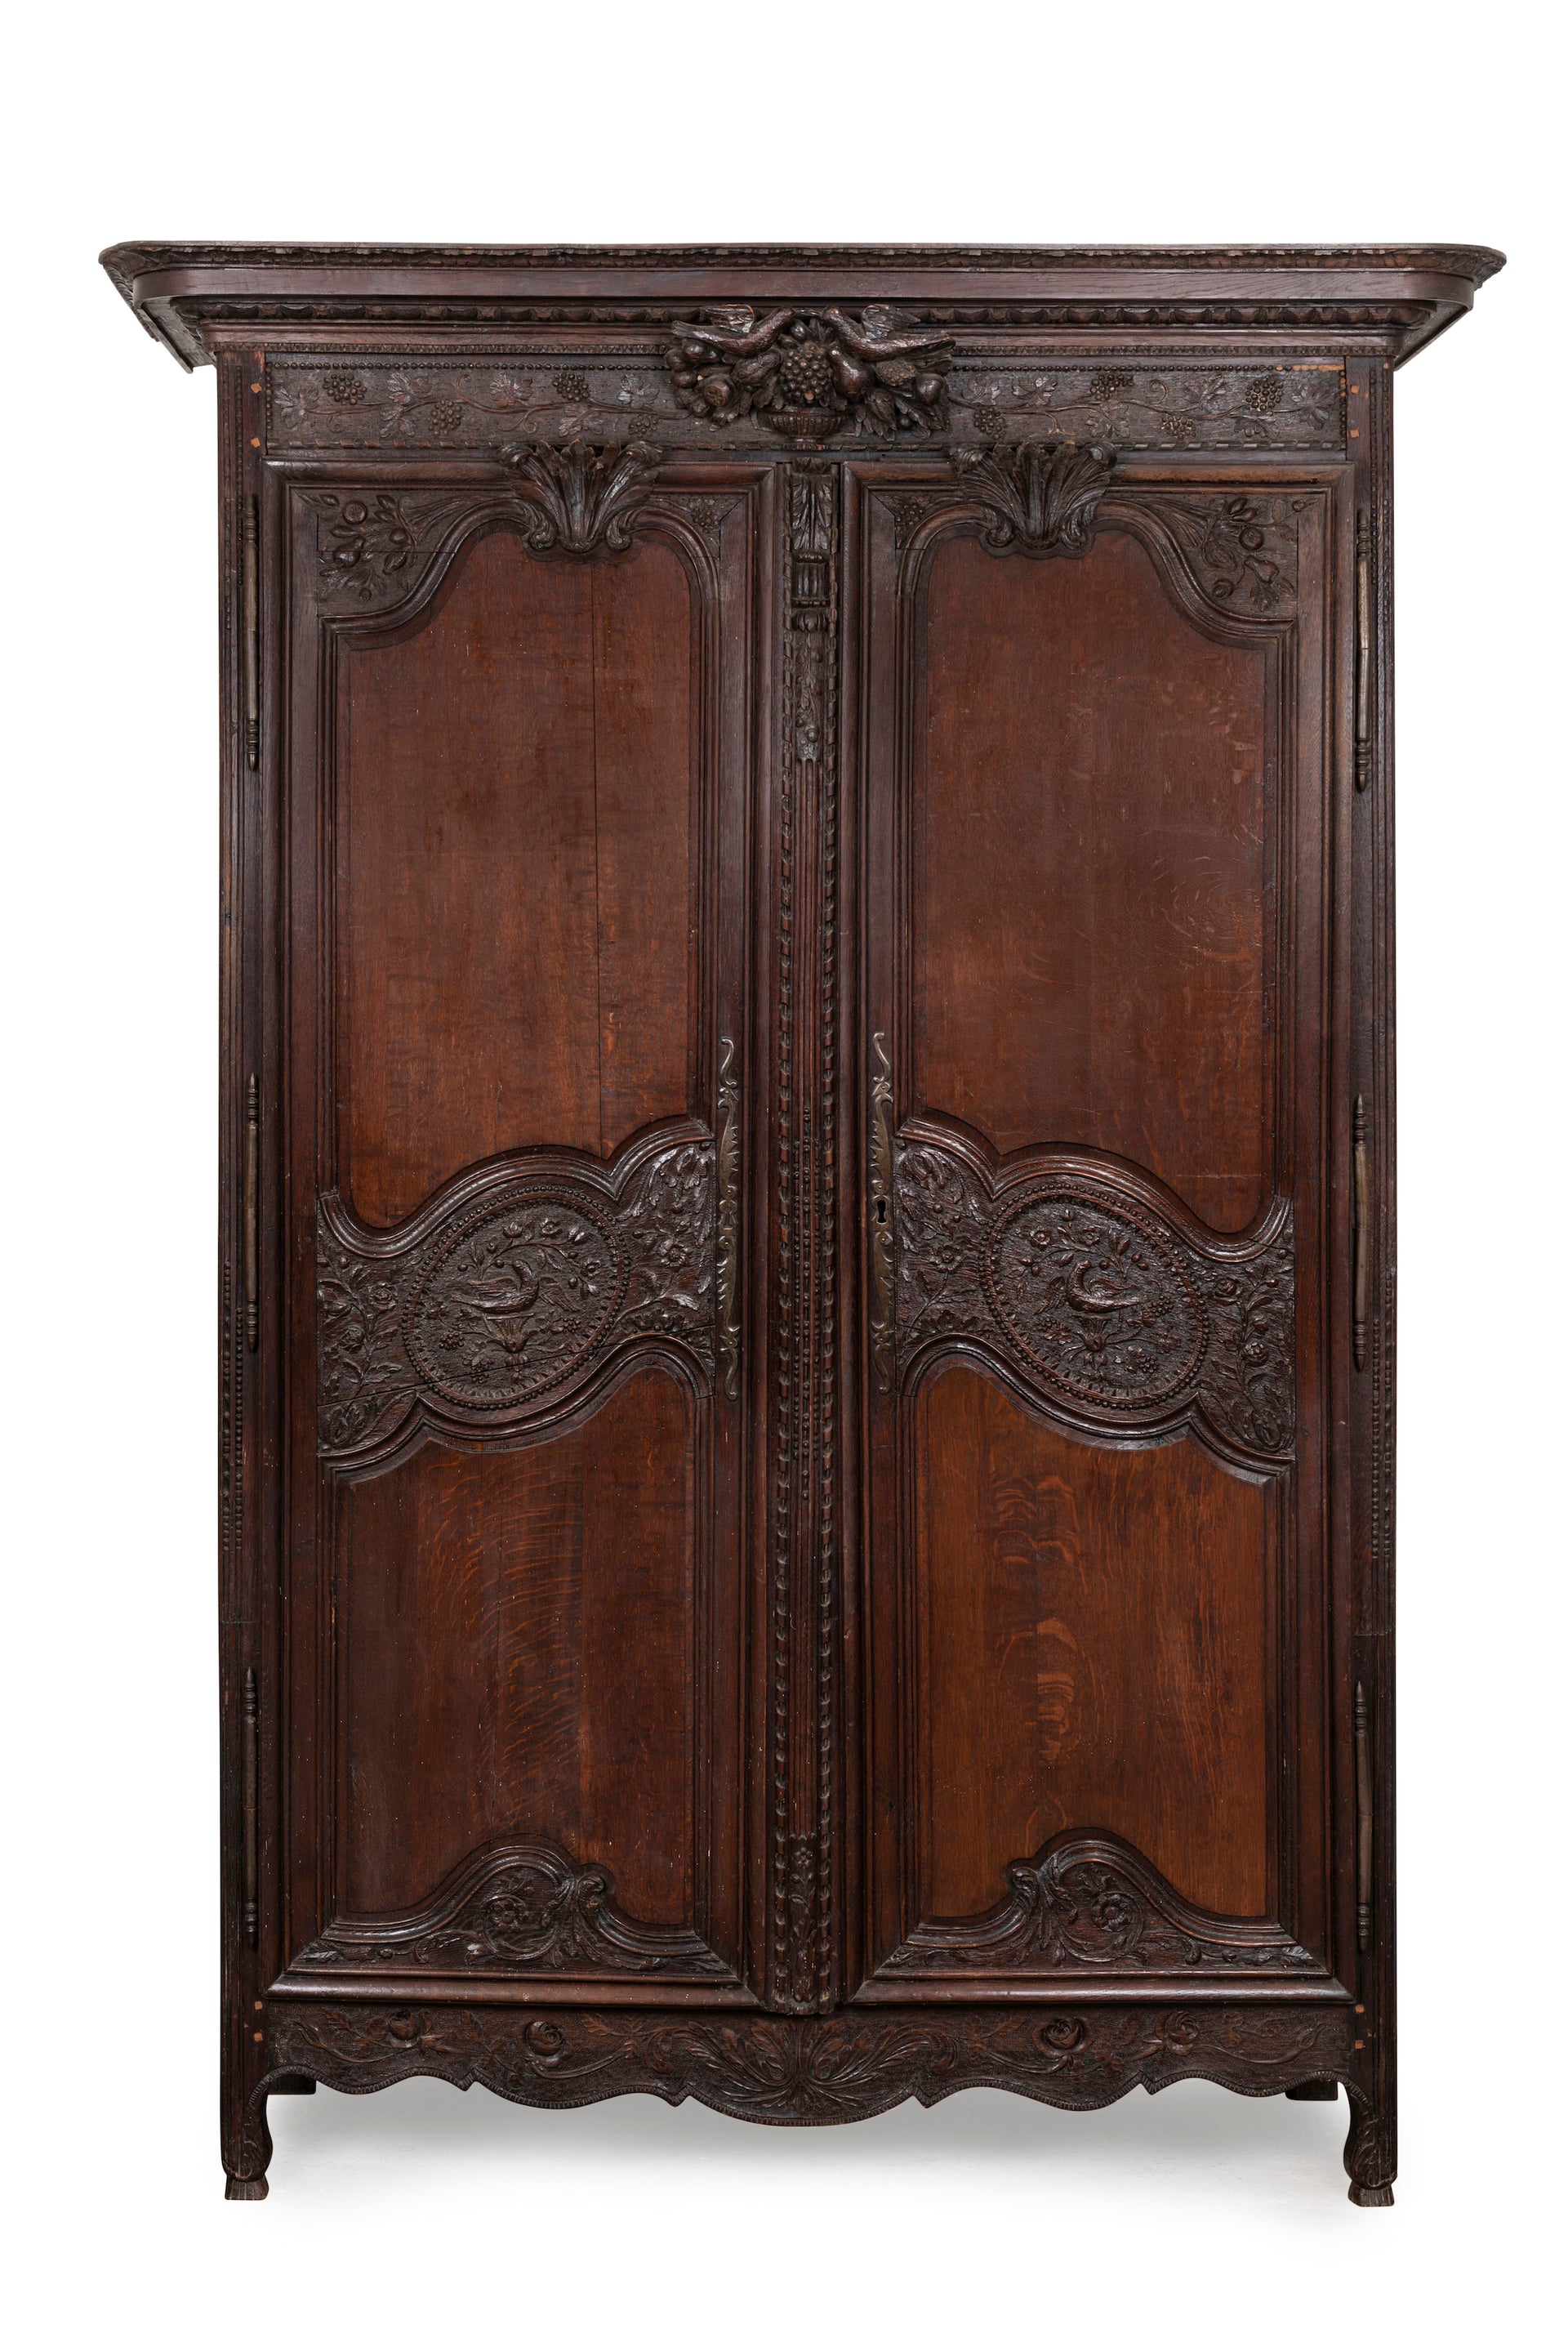 SOLD A beautifully carved dark oak Armoire Marriage, French early 19th Century